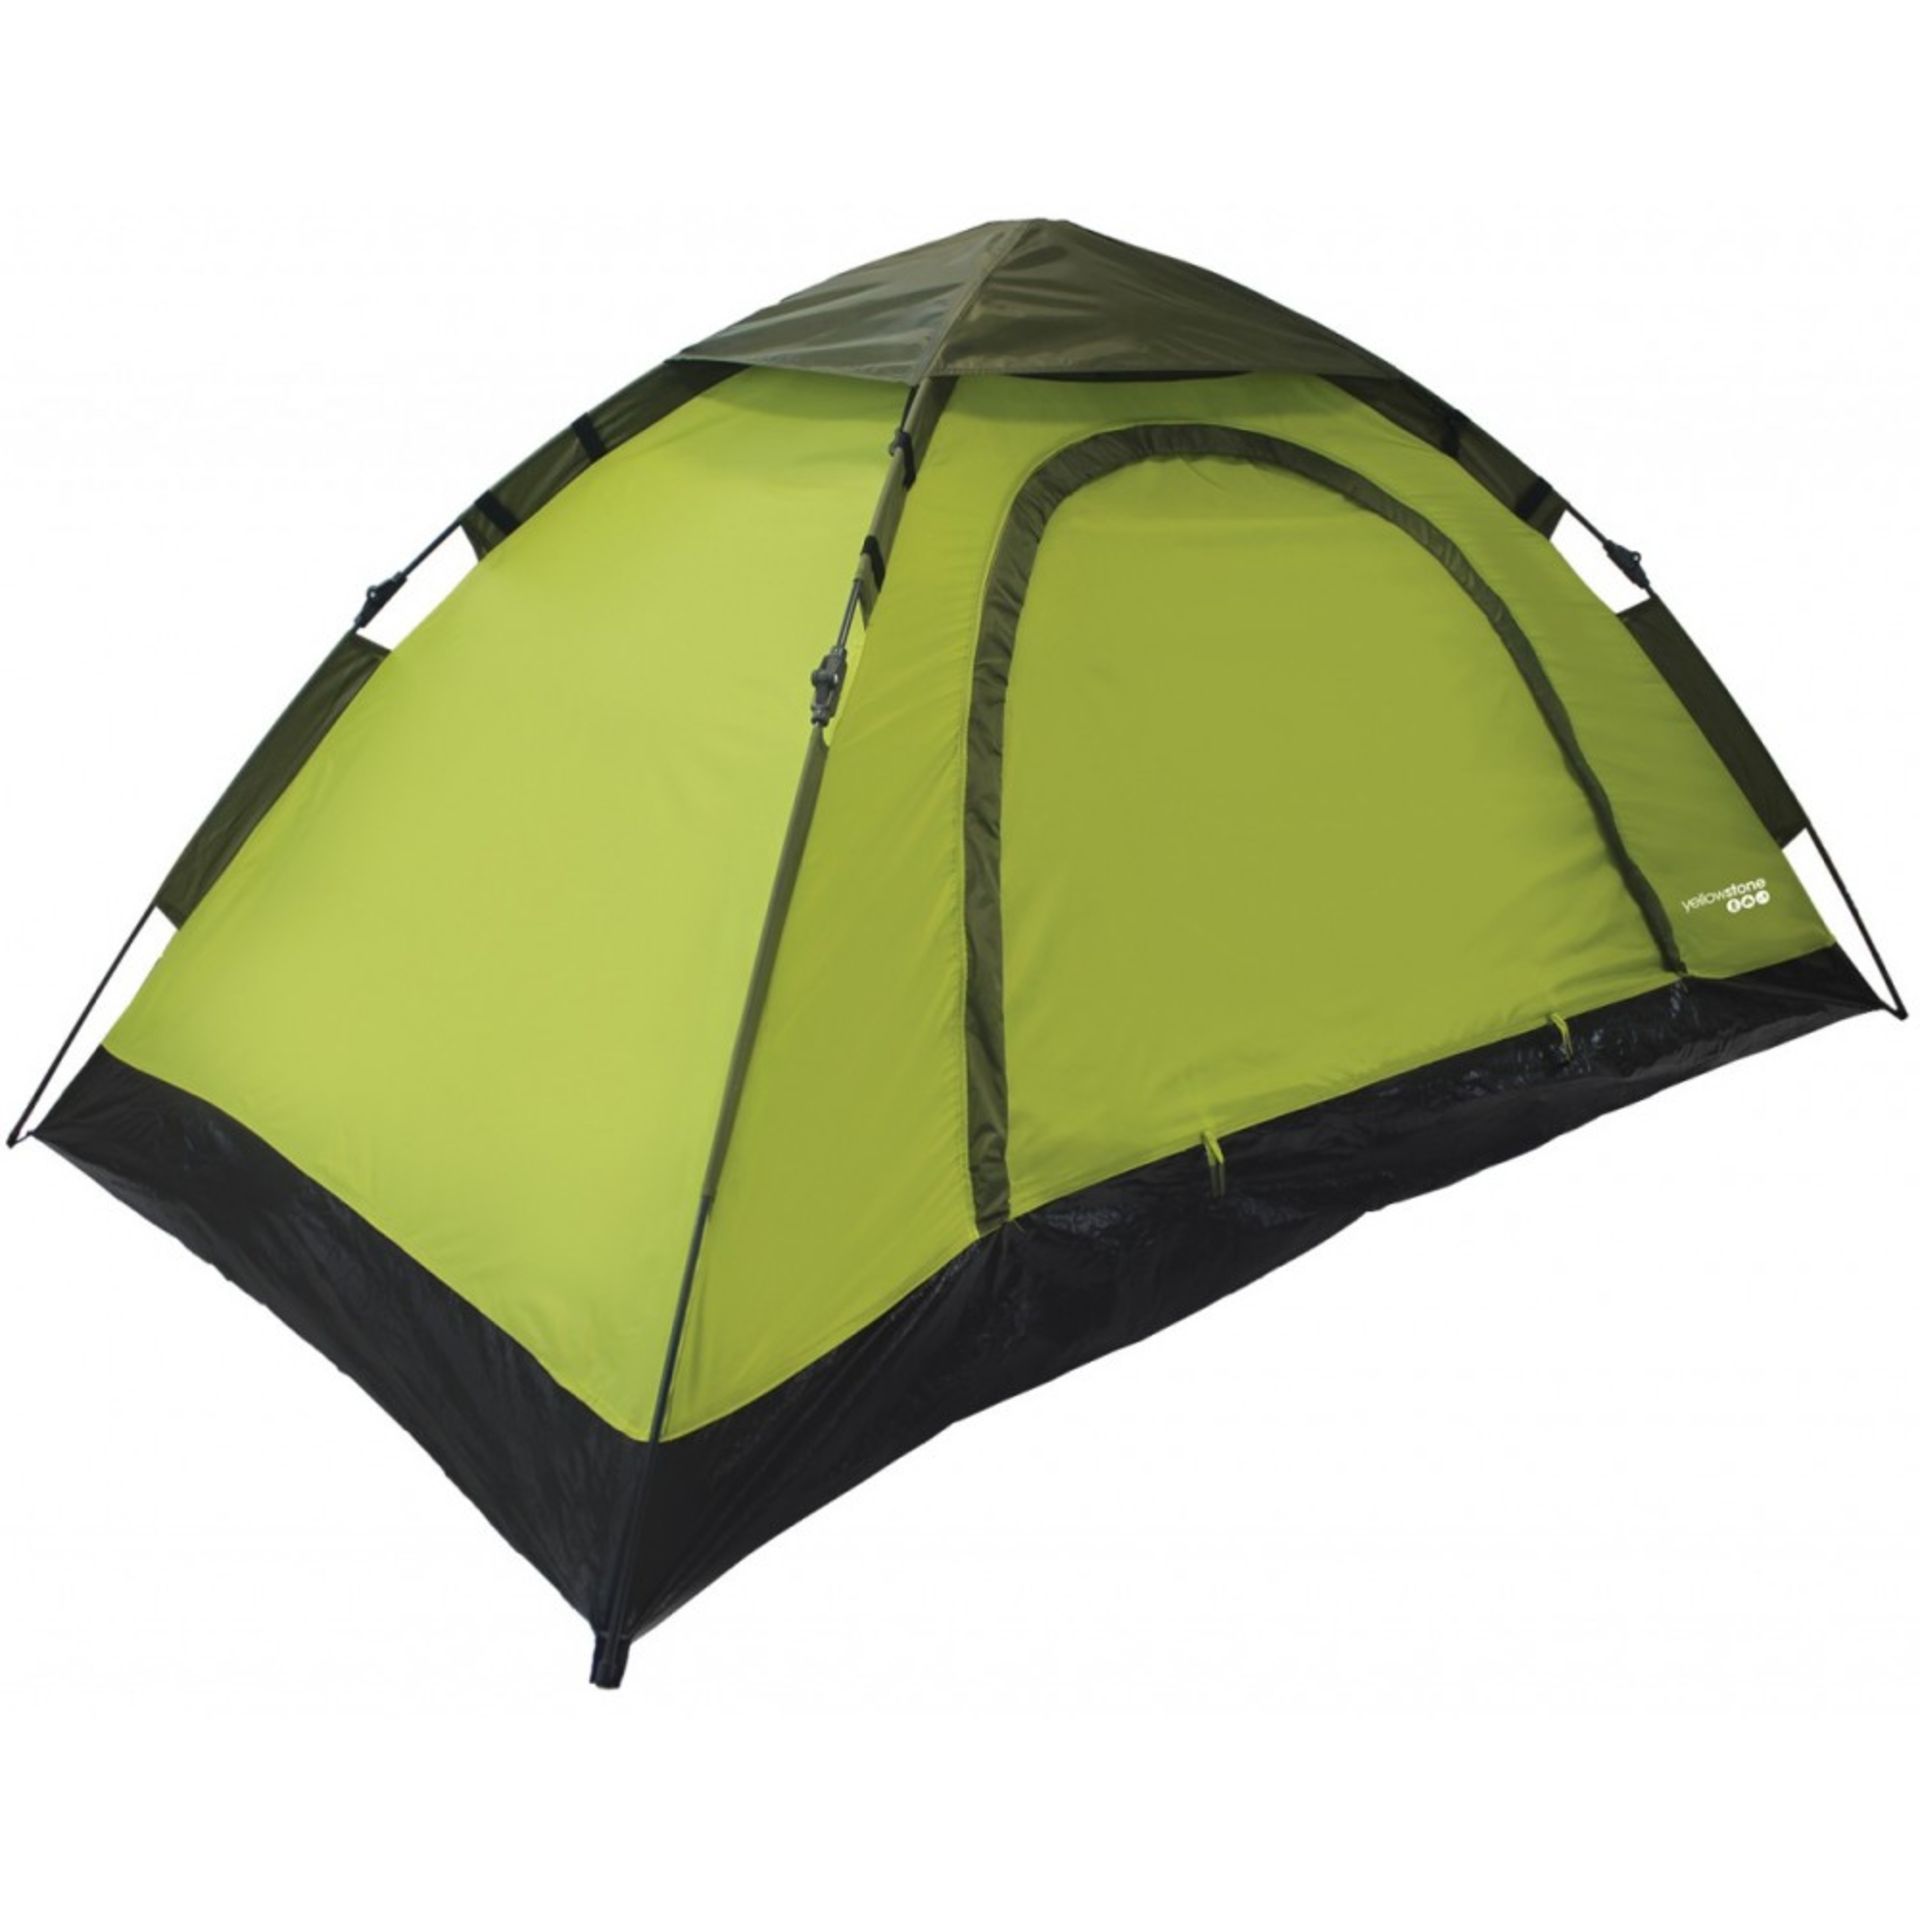 V Brand New 2 Man Umbrella Rapid Tent With Canopy - Green/Charcoal - Sewn in Groundsheet - Easy Push